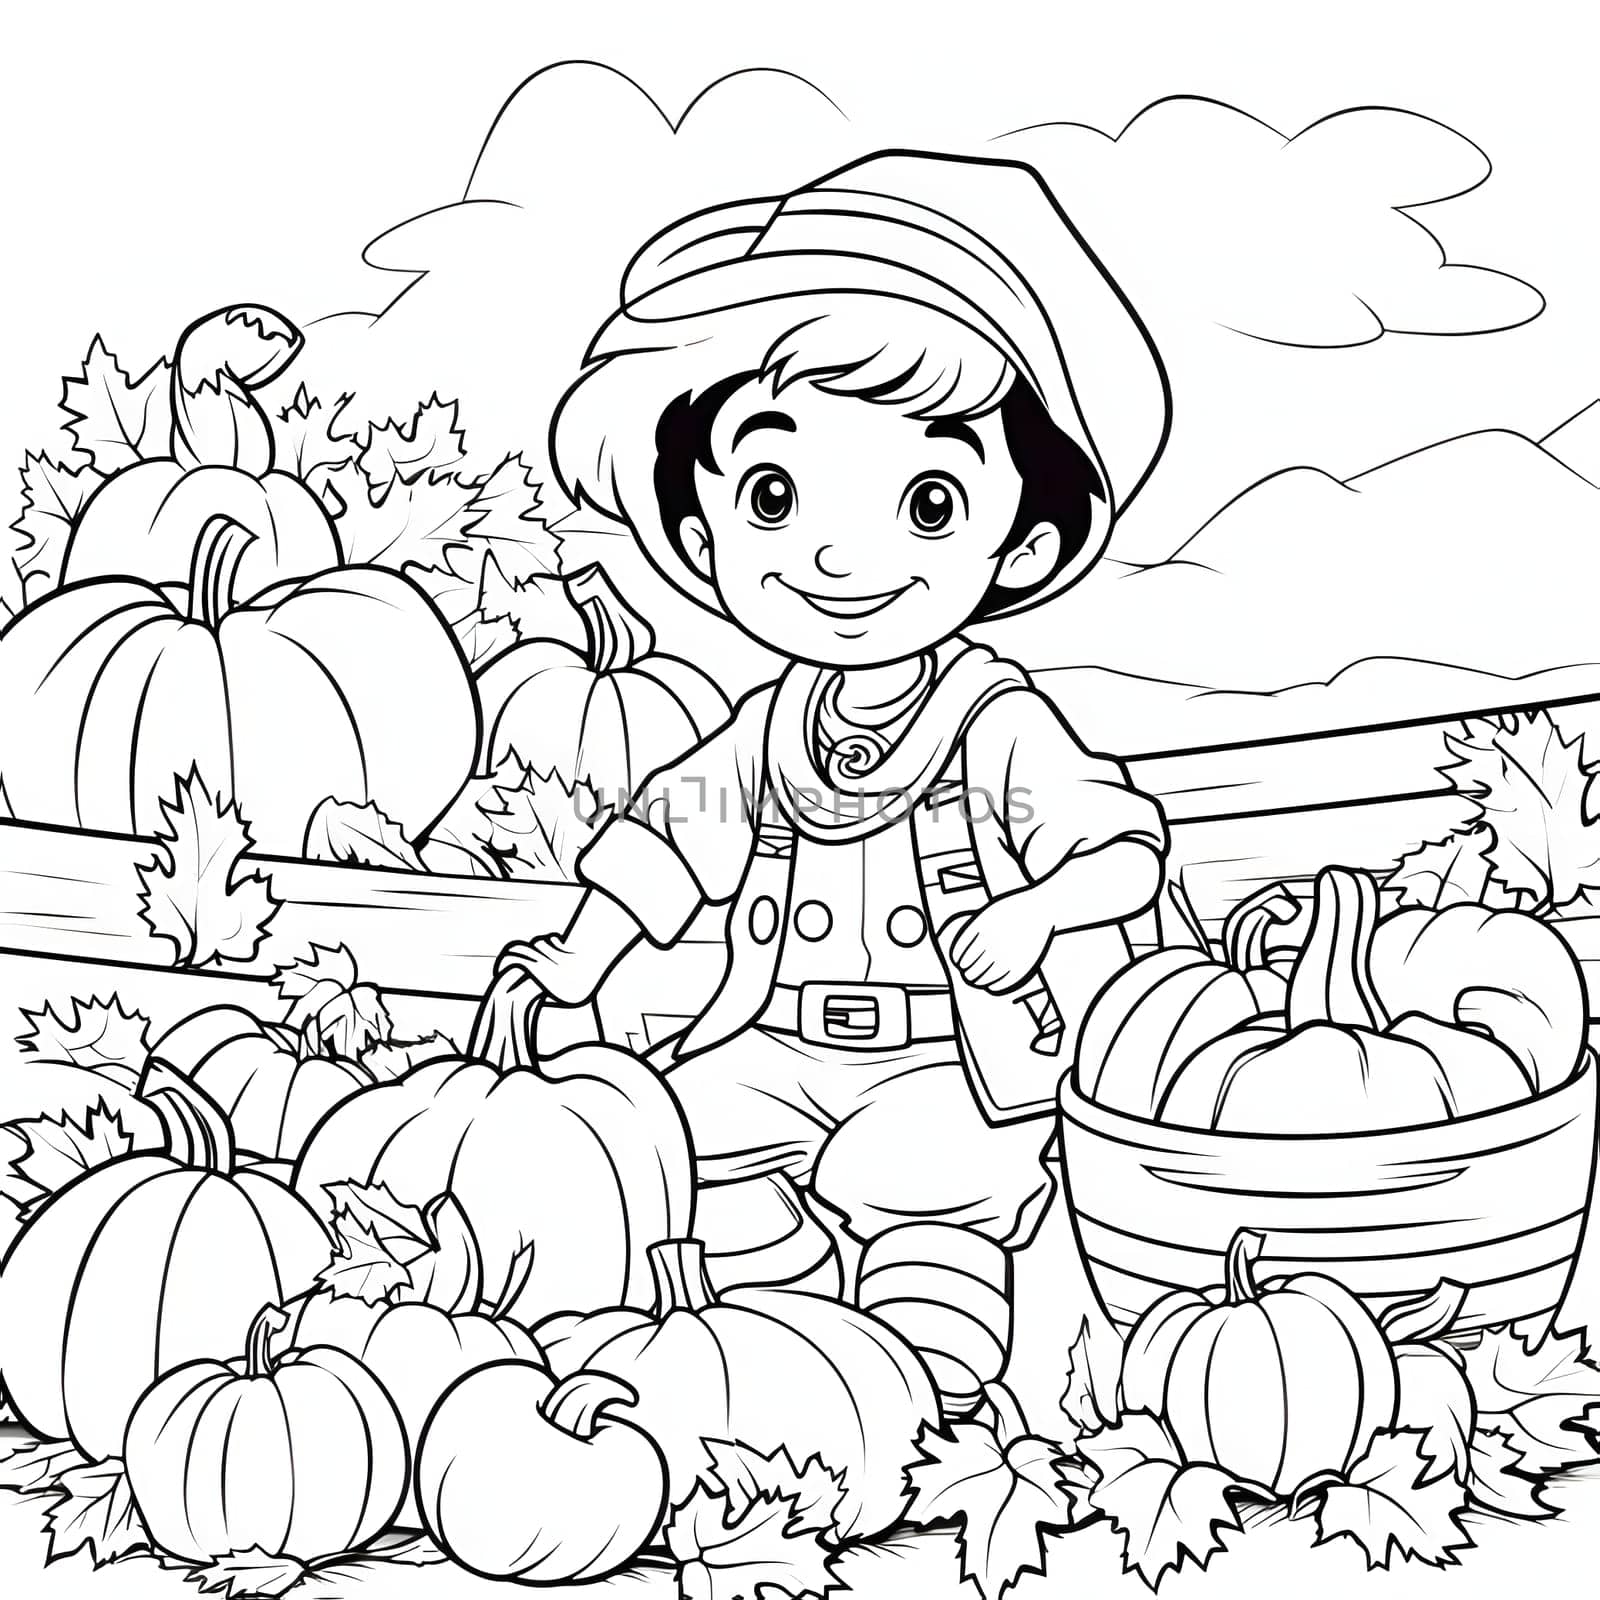 Black and white coloring sheet happy smiling boy with pumpkins. Pumpkin as a dish of thanksgiving for the harvest, picture on a white isolated background. by ThemesS